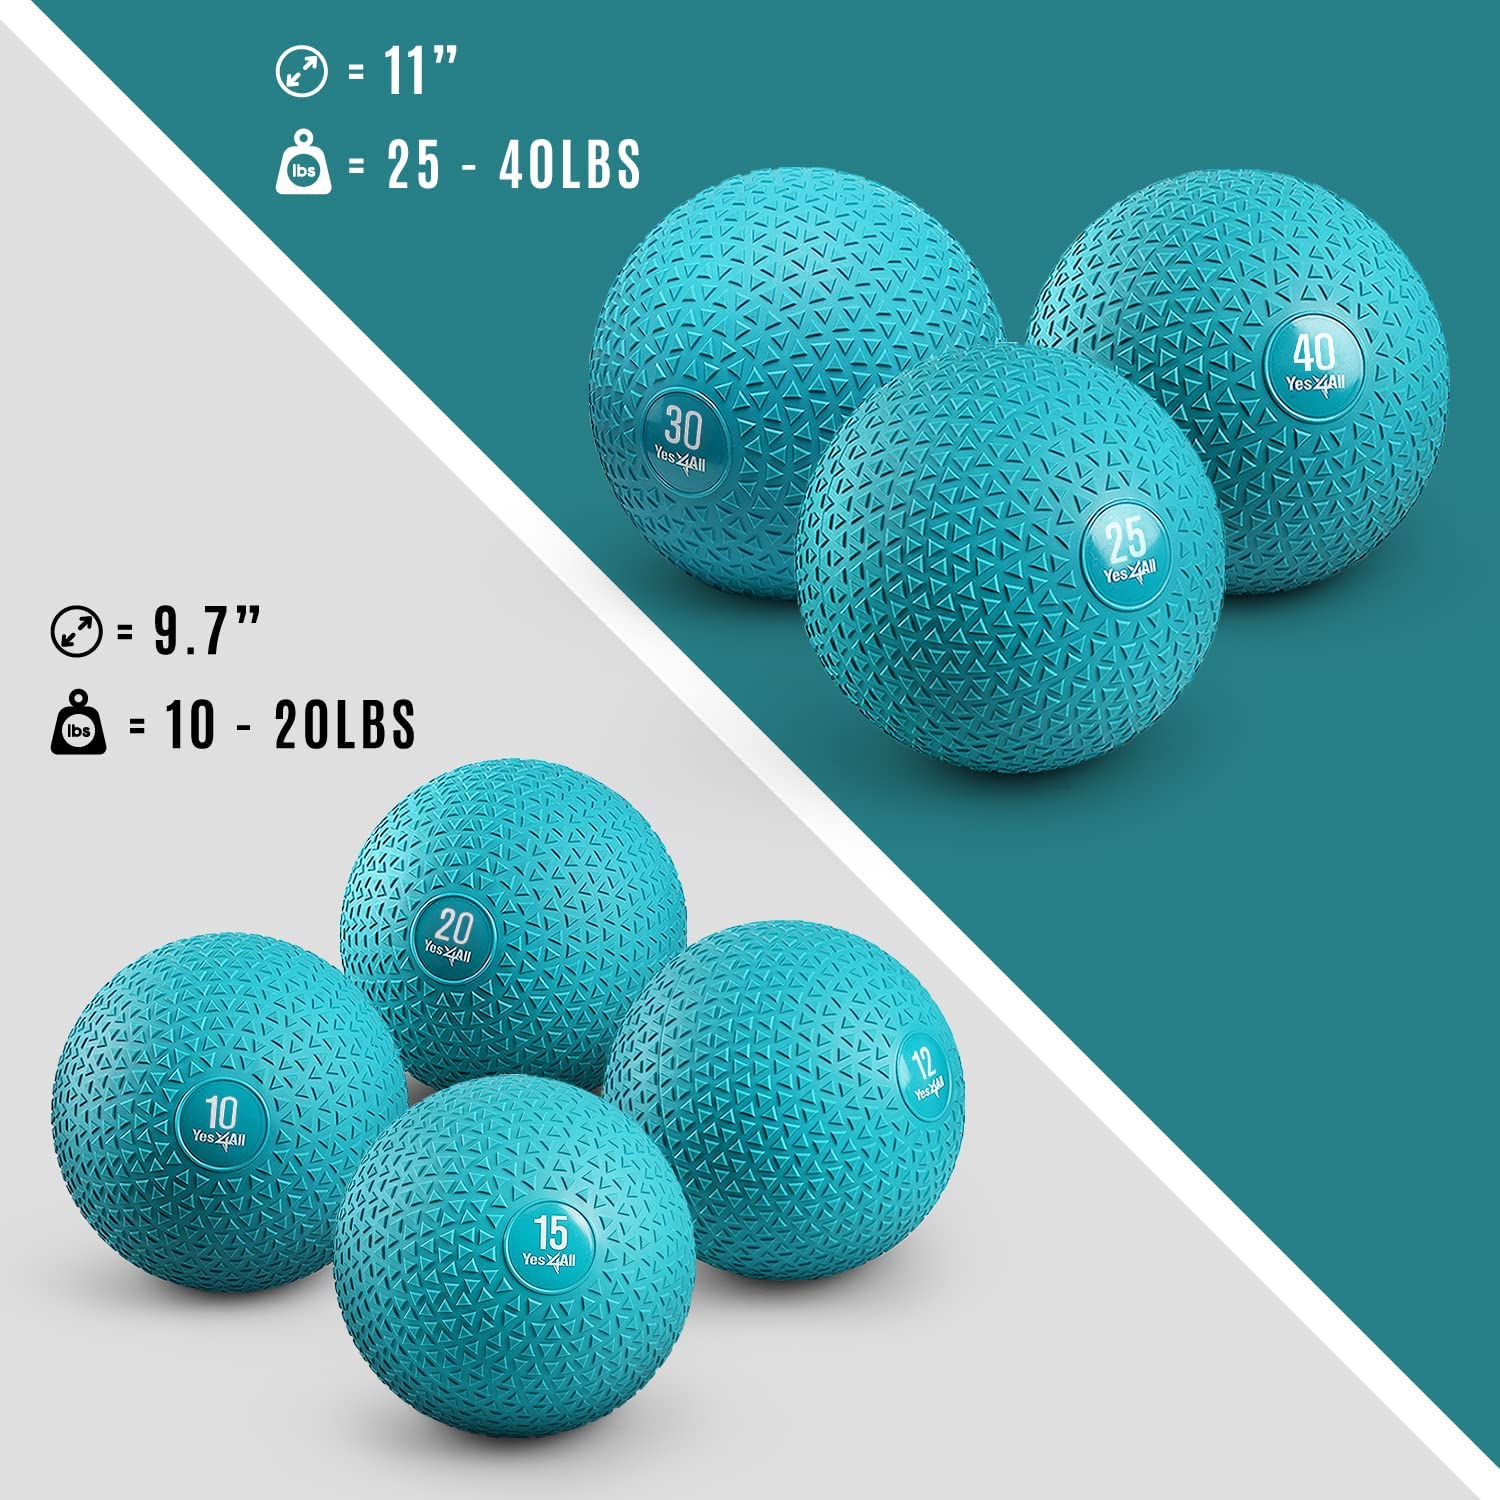 Yes4All 30lbs Slam Medicine Ball Triangle Teal - image 3 of 8